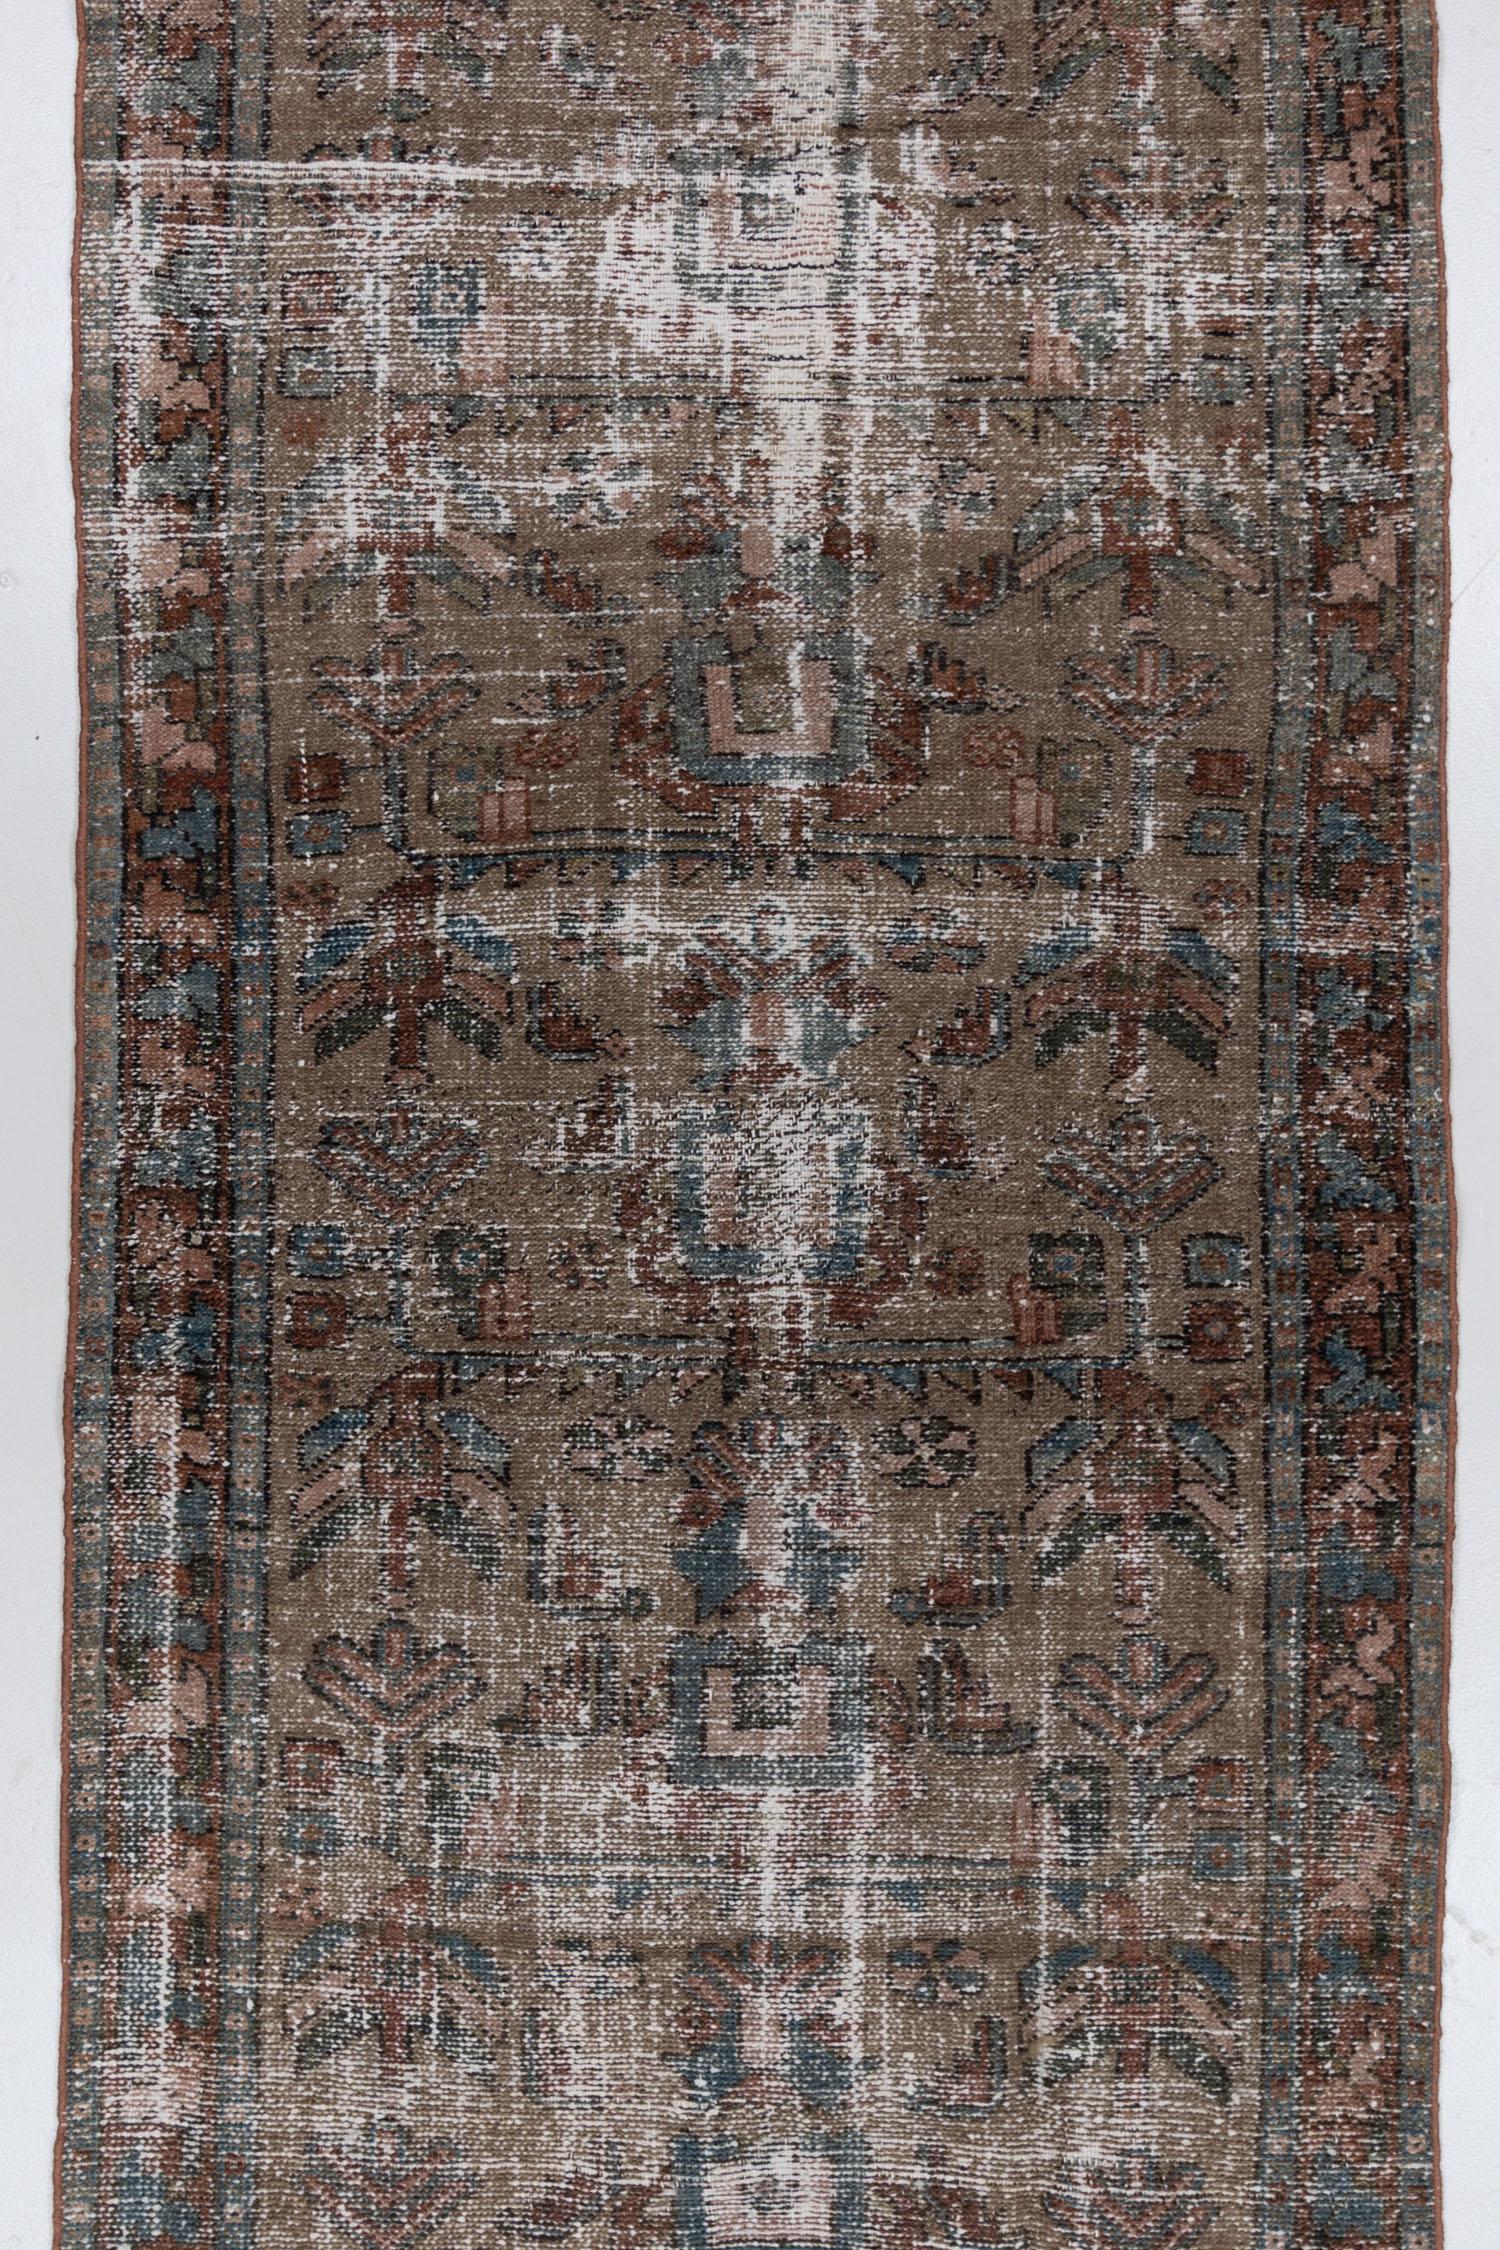 Beautifully worn vintage Persian Hamadan with an earthy brown field and subtle coloration. The foundation has been repaired and this rug is safe for use in high traffic areas. 

